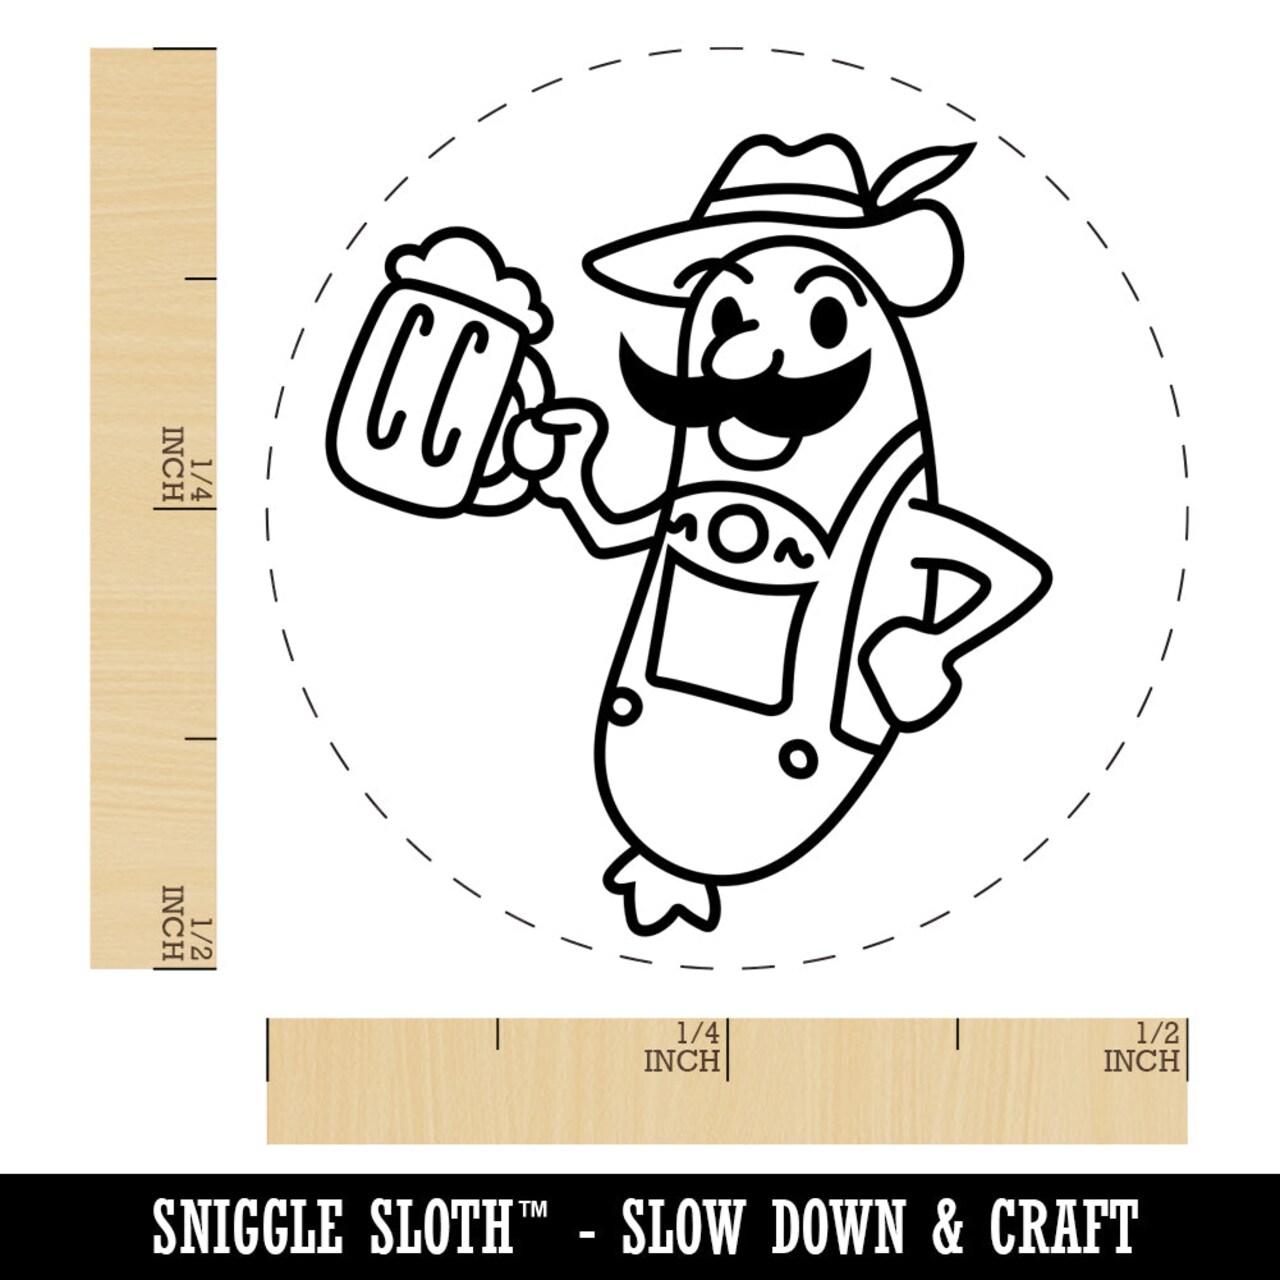 Oktoberfest Bratwurst in Lederhosen with Beer Self-Inking Rubber Stamp for Stamping Crafting Planners